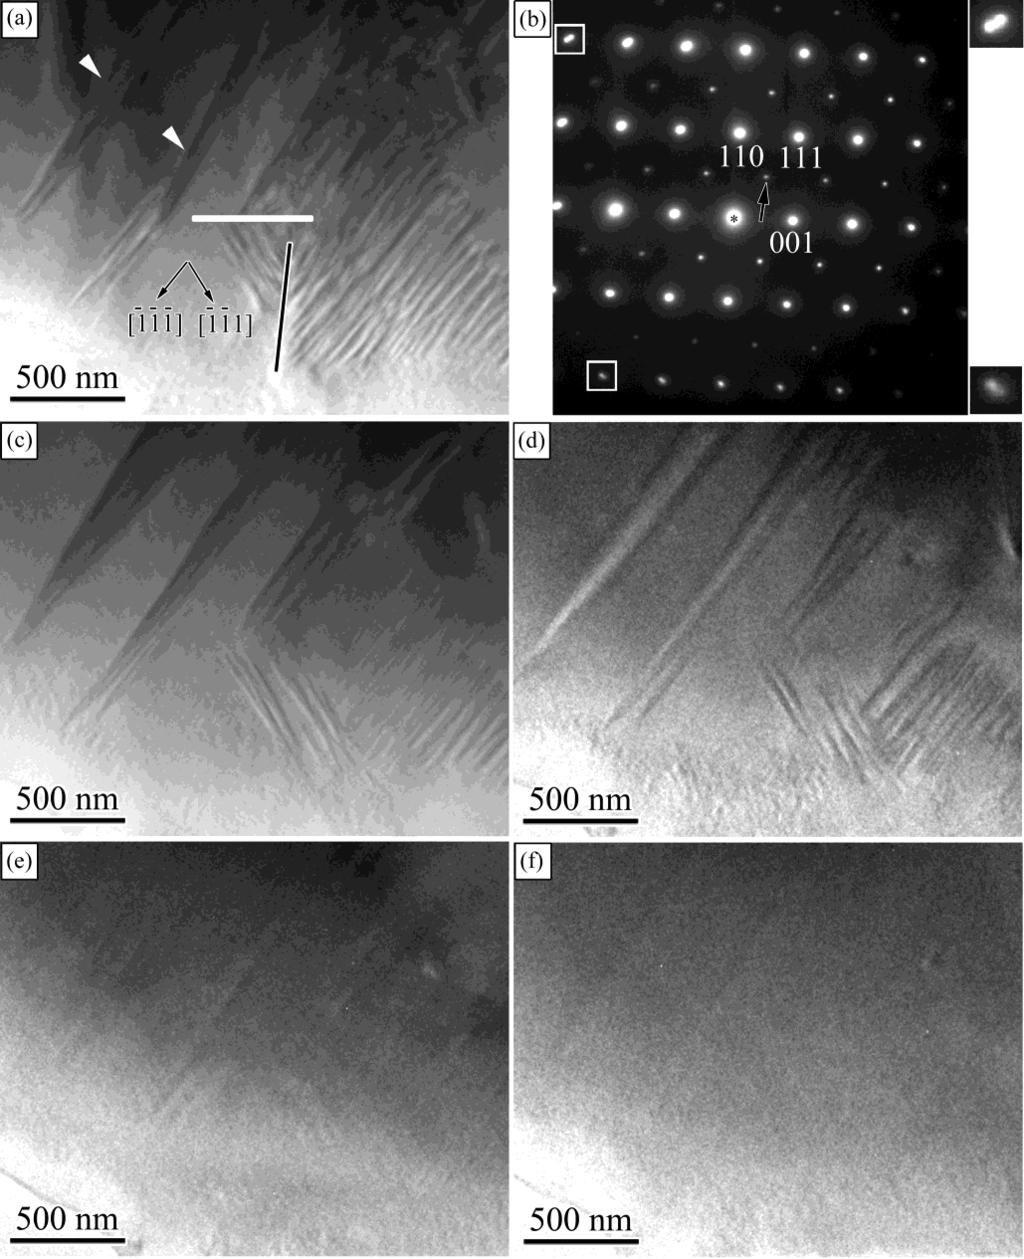 Fig. 2. Bright-field TEM images of the ferroelectric domains in the ceramic recorded at (a) 25 C, (c) 100 C, (d) 140 C, (e) 160 C and (f) 180 C, respectively.